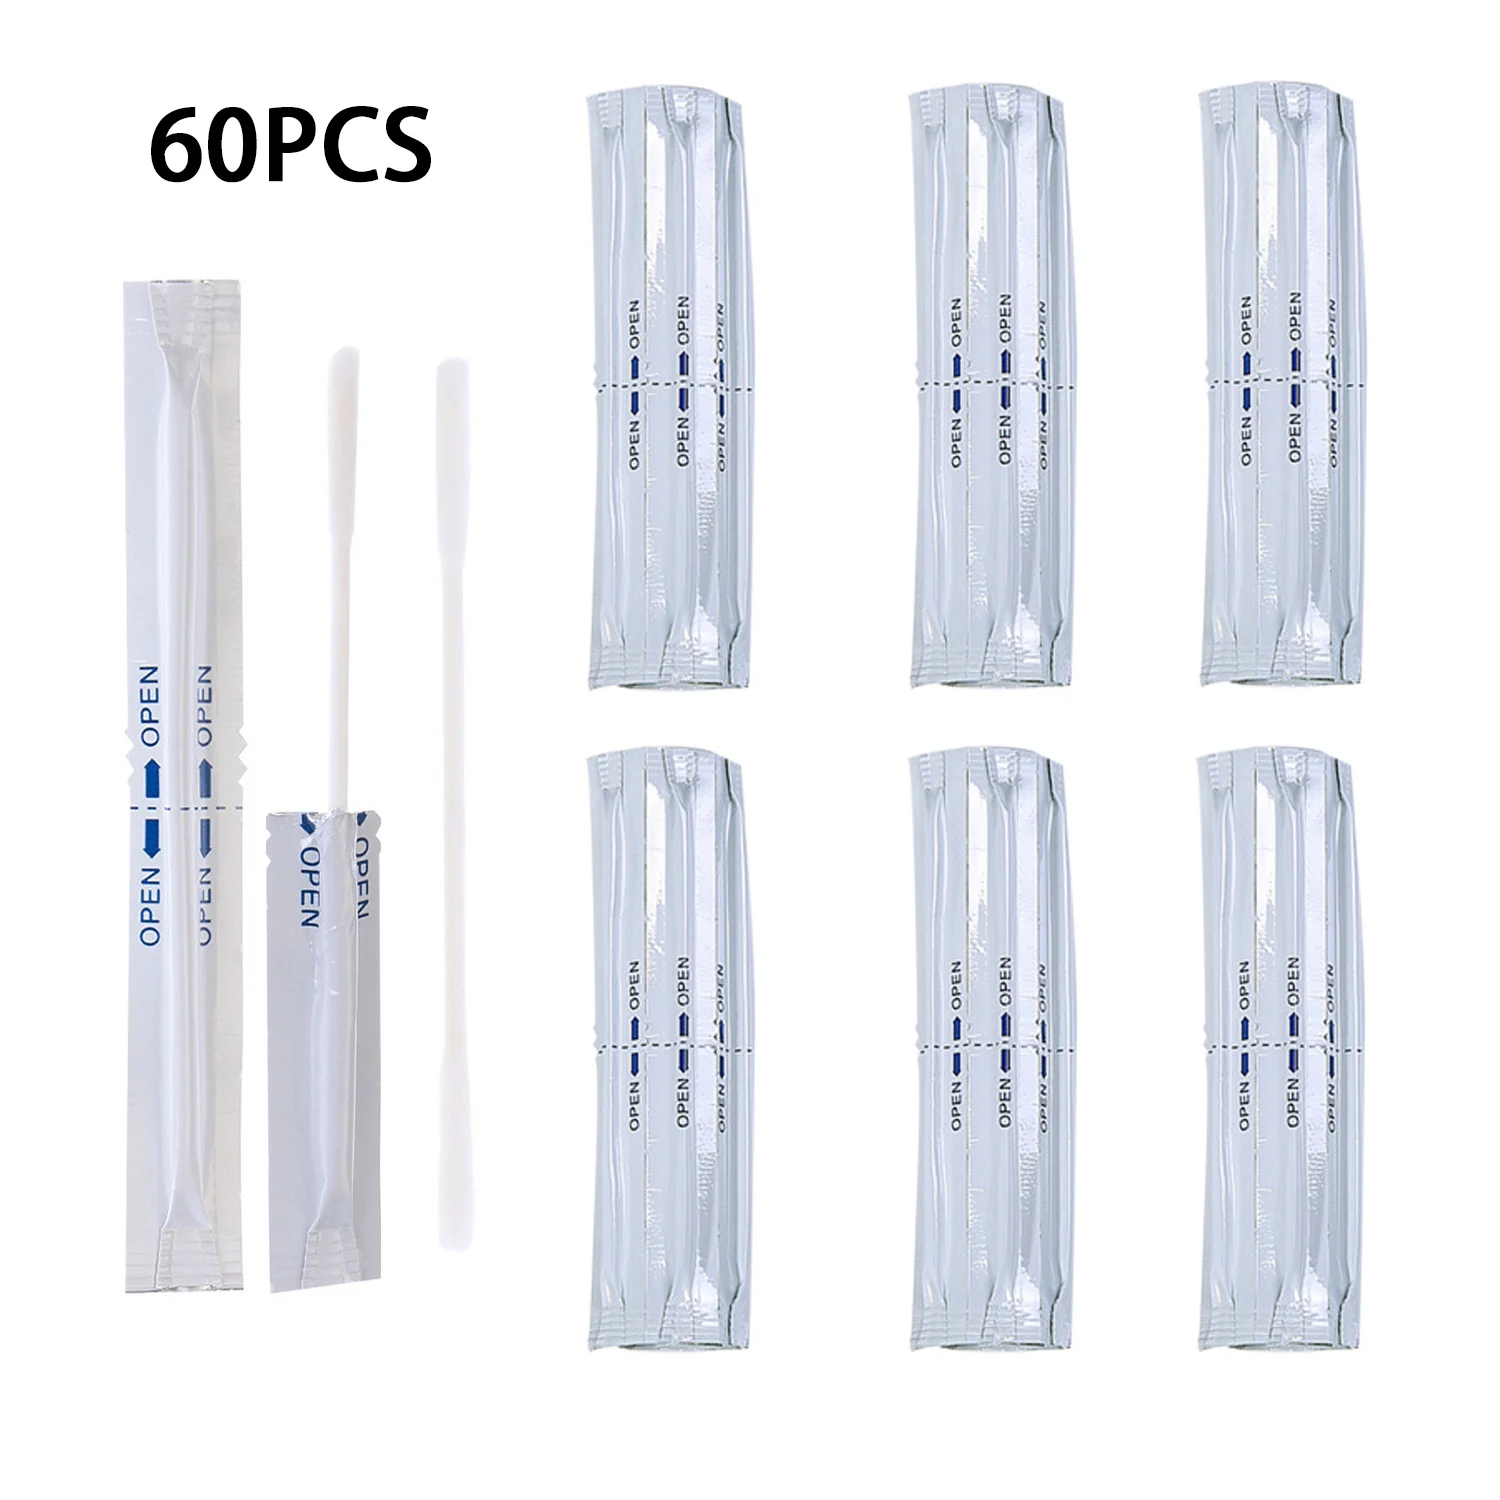 60pcs Wet Cotton Swabs Double Head Cleaning Stick For IQOS 3.0 3 Duo 3Duo LIL/LTN/HEETS/GLO 2.4 PLUS Heater Cleaner